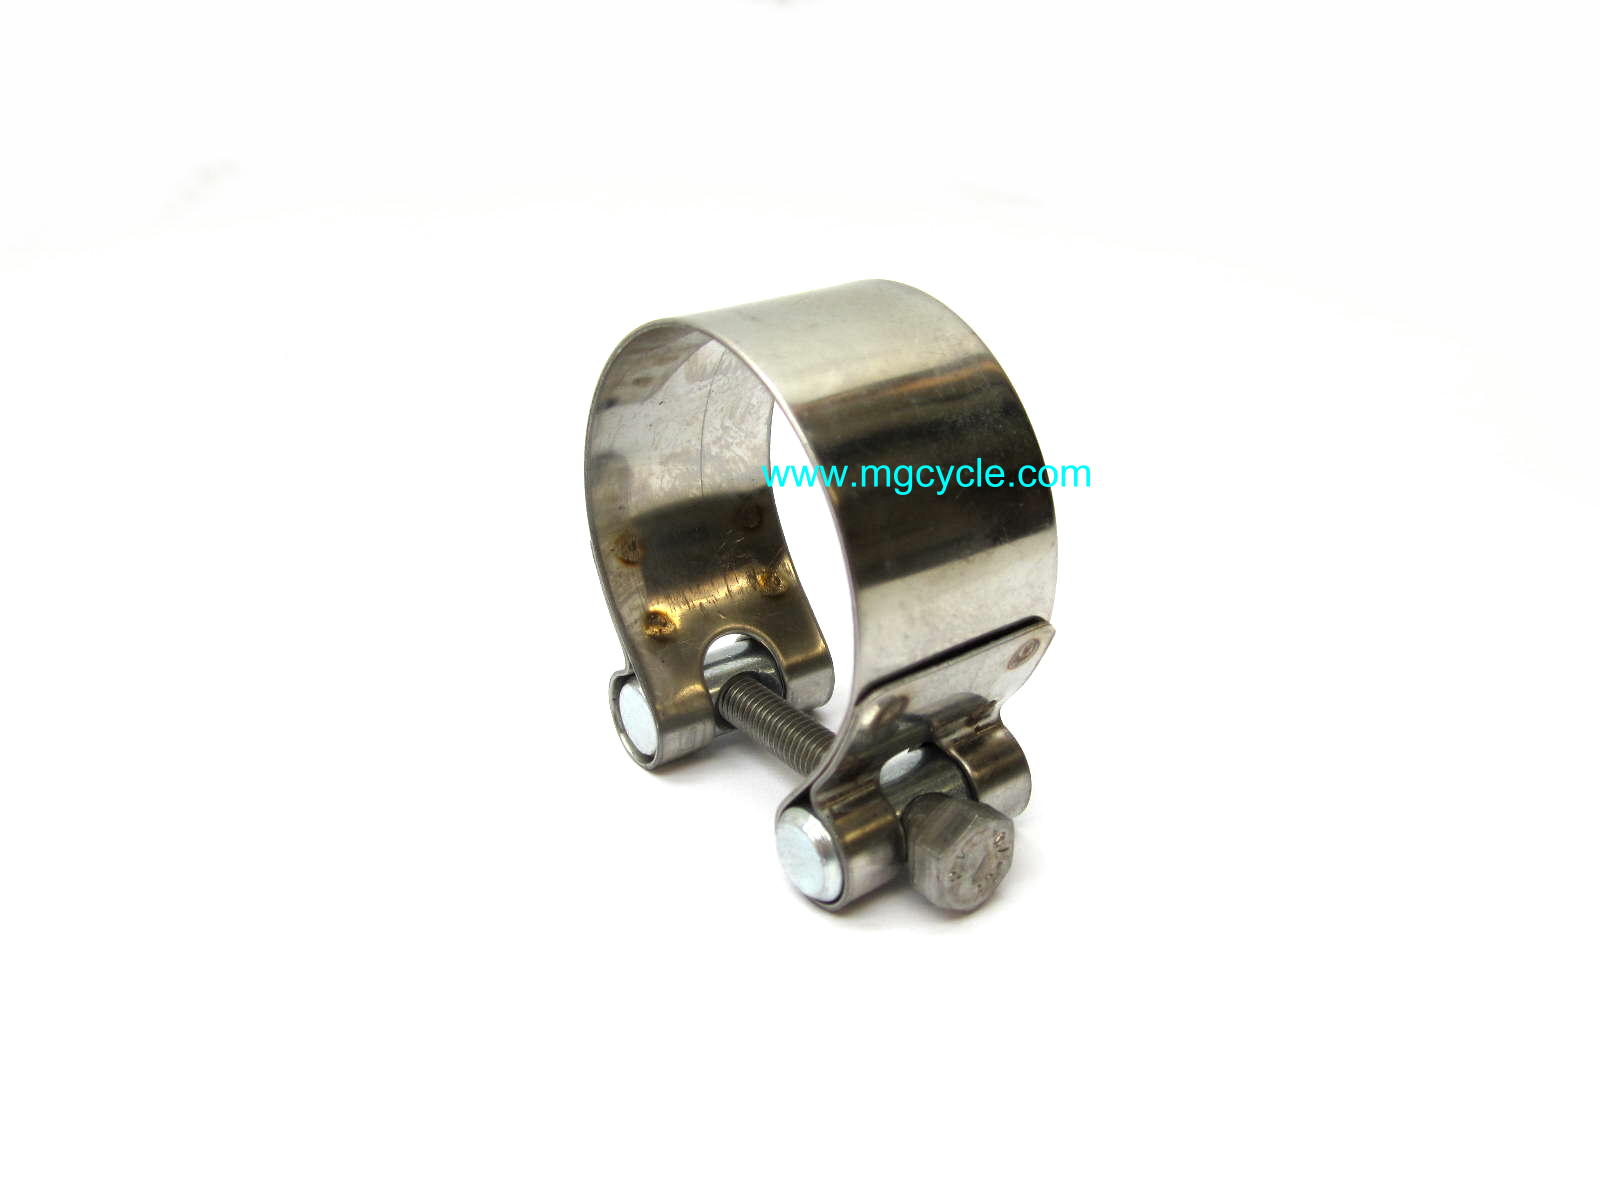 Stainless crossover clamp T/T3/Cal3/1100, V7 Sport muffler clamp